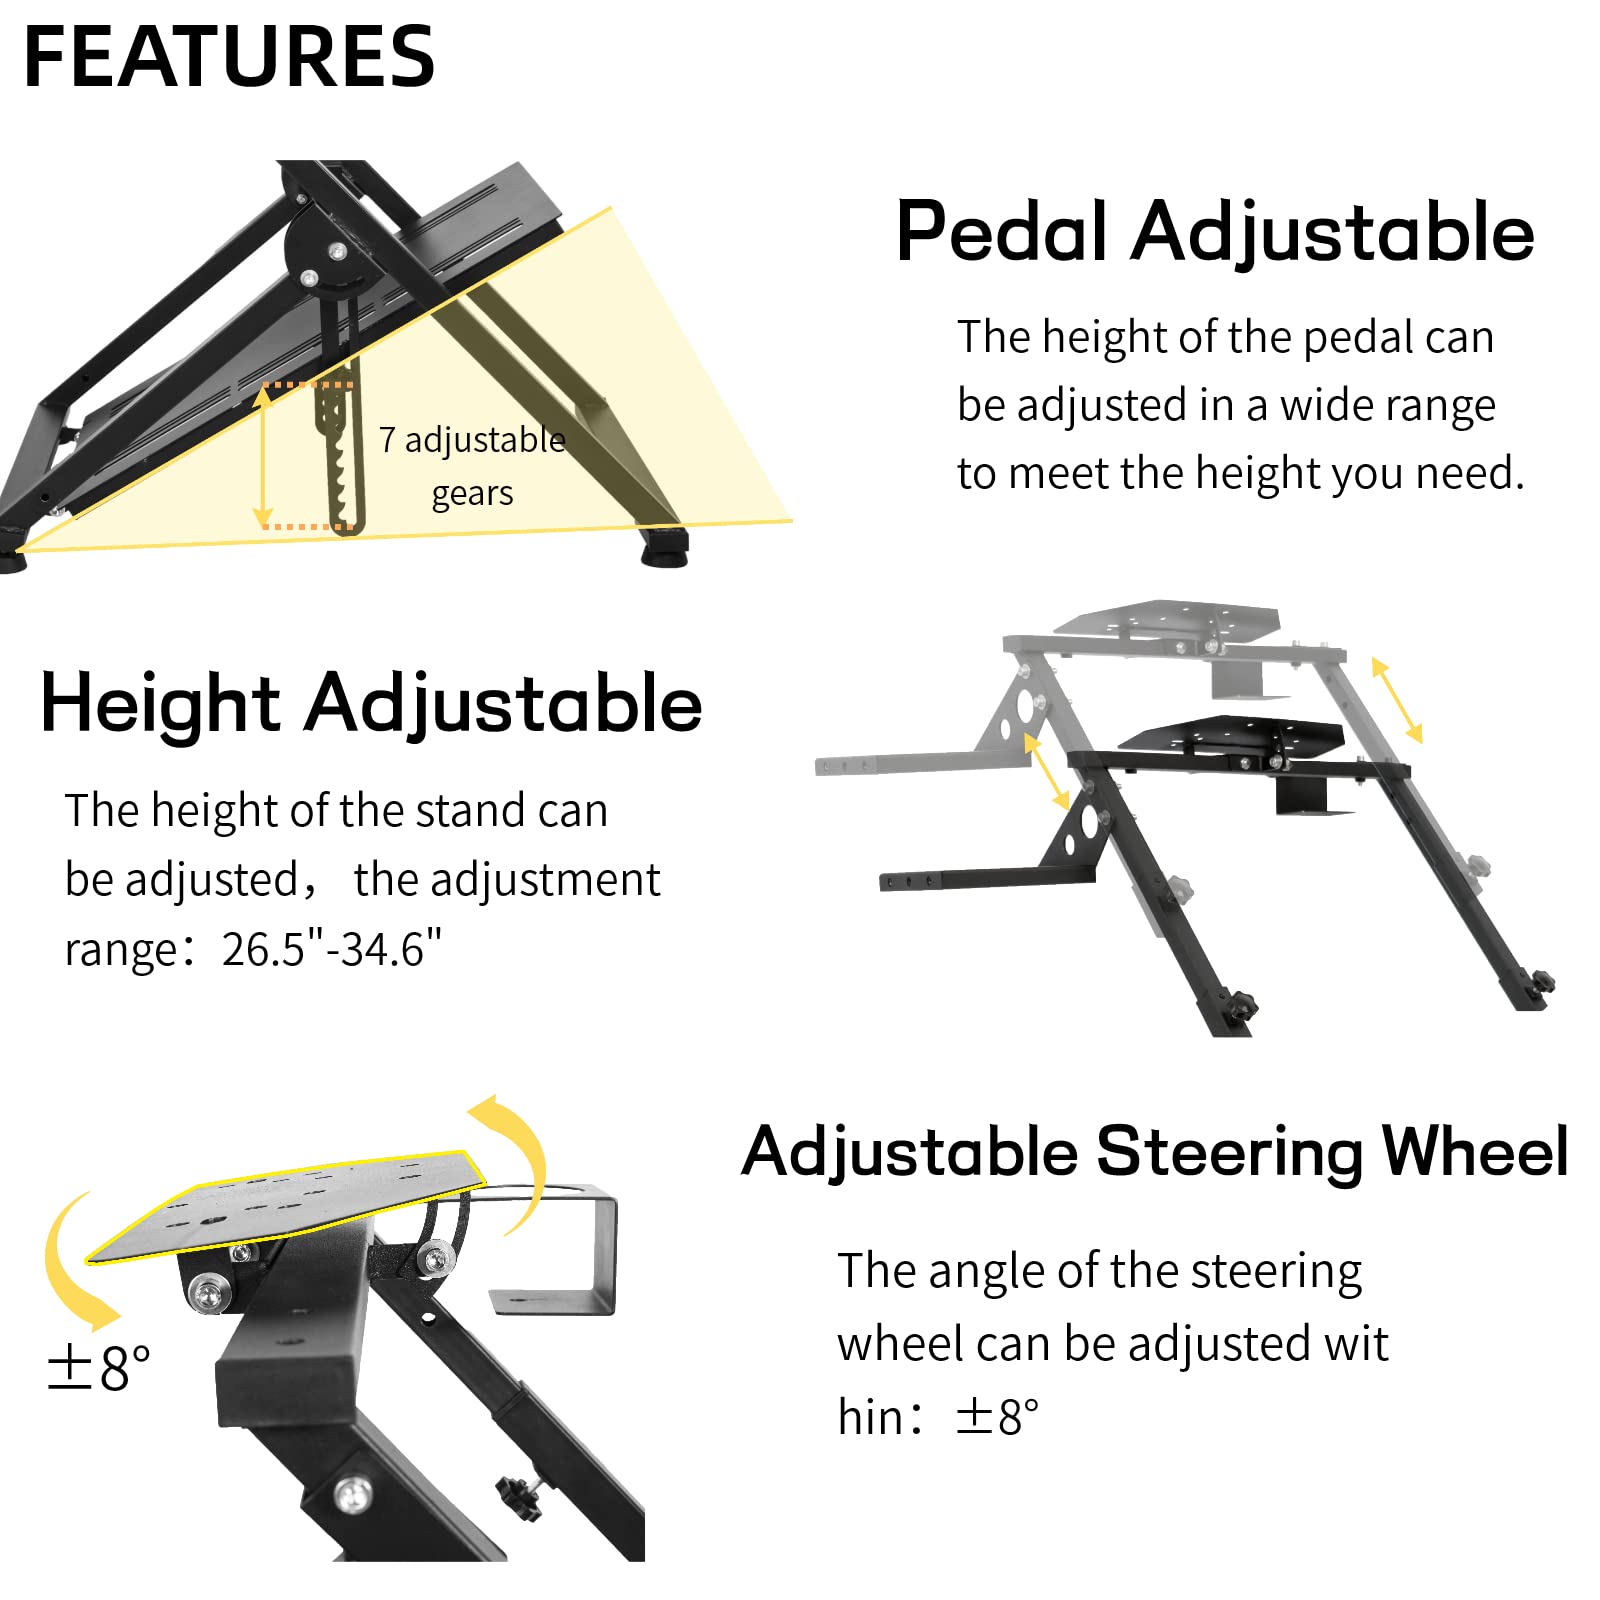 Marada Racing Wheel Stand X Frame Compatible for G29 G920 T300RS T150 New Upgrade Racing Simulator Steering Wheel Stand Foldable & Adjustable Wheel, Shifter,Pedals and Handbrake NOT Included